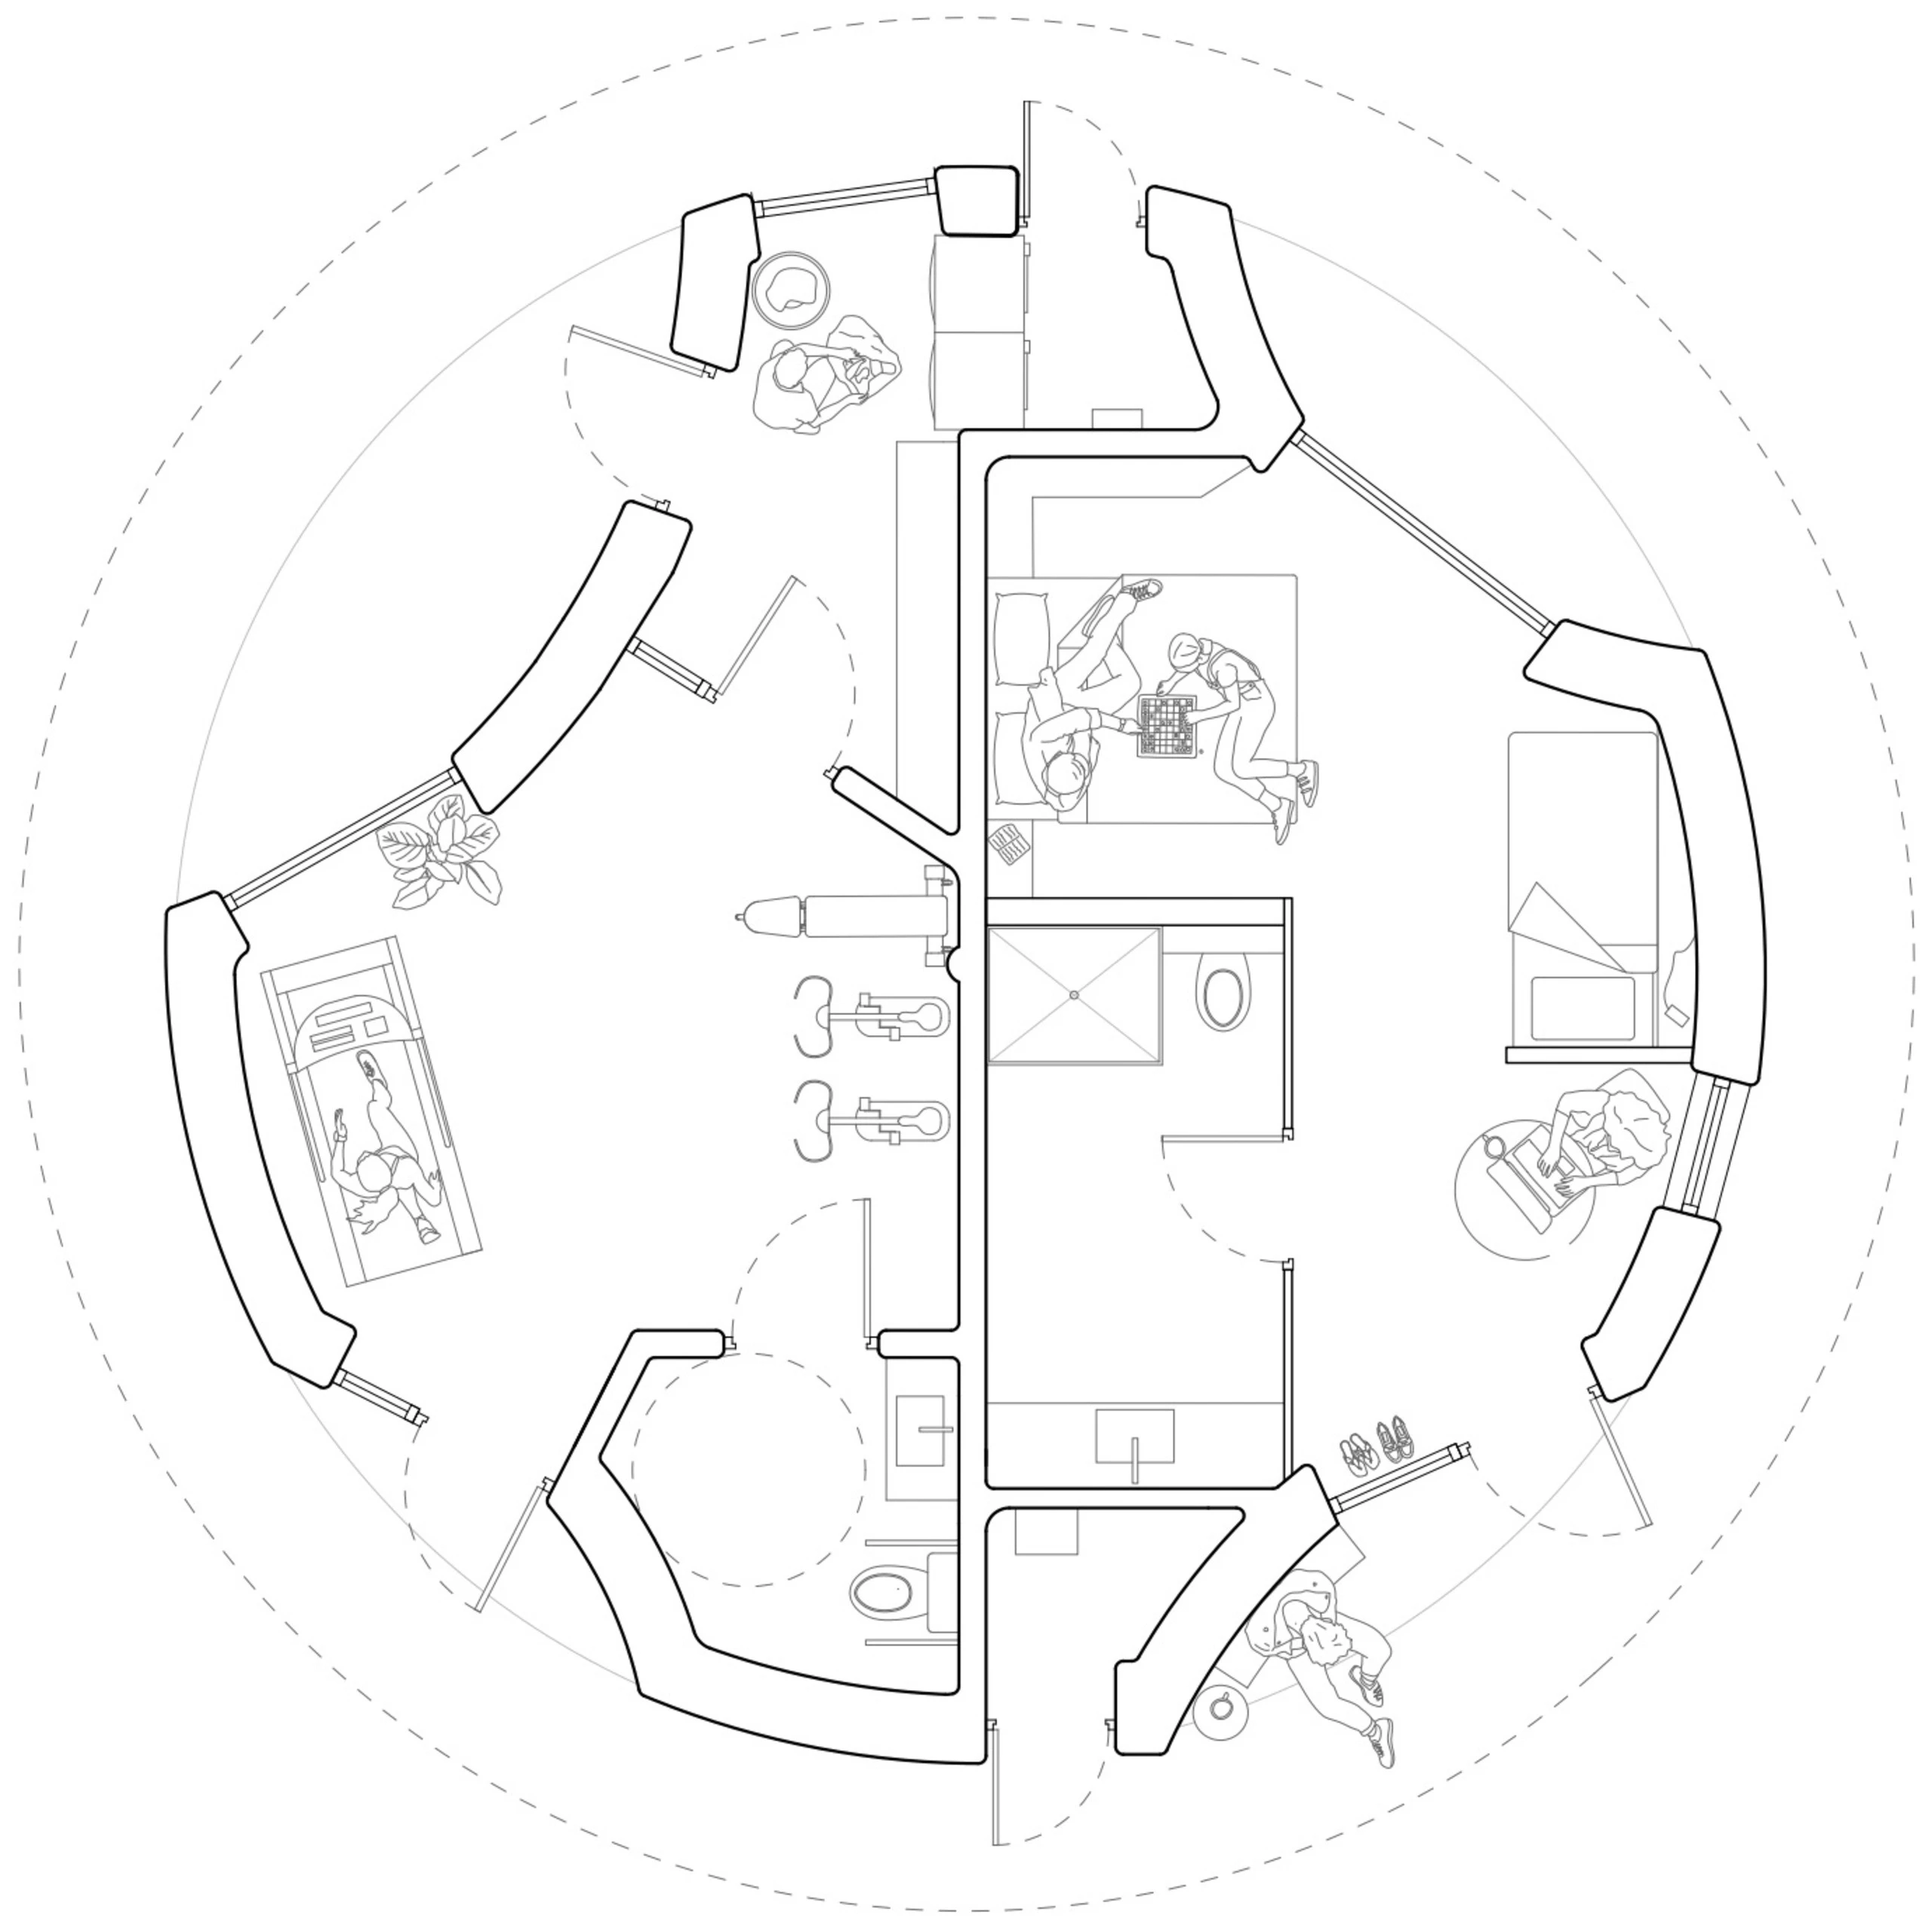 Floorplan drawing of the 3D-printed Community House